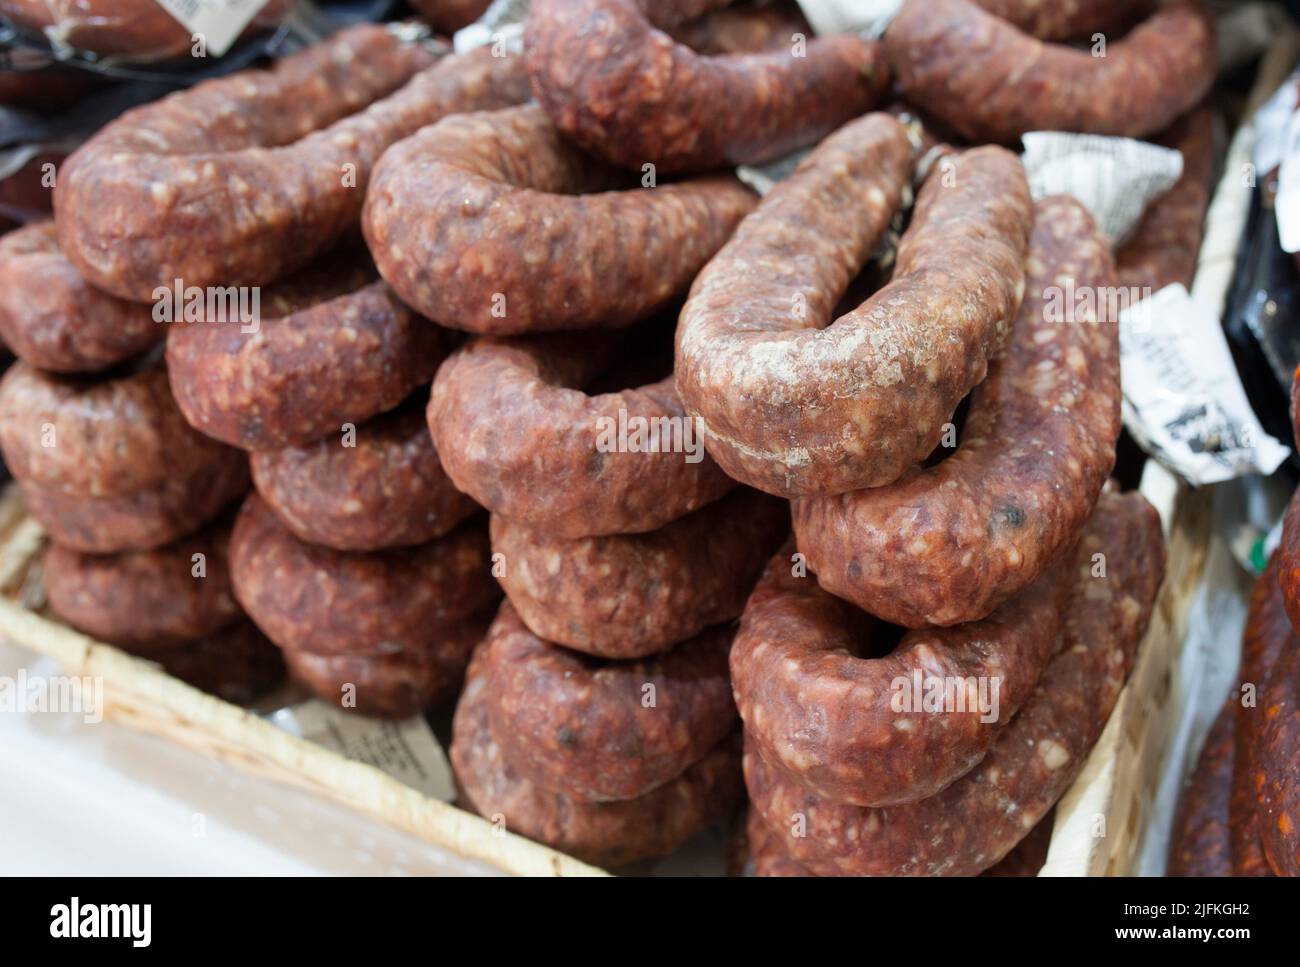 Iberian cured spicy sausage or salchichon. Displayed at street market stall. Stock Photo